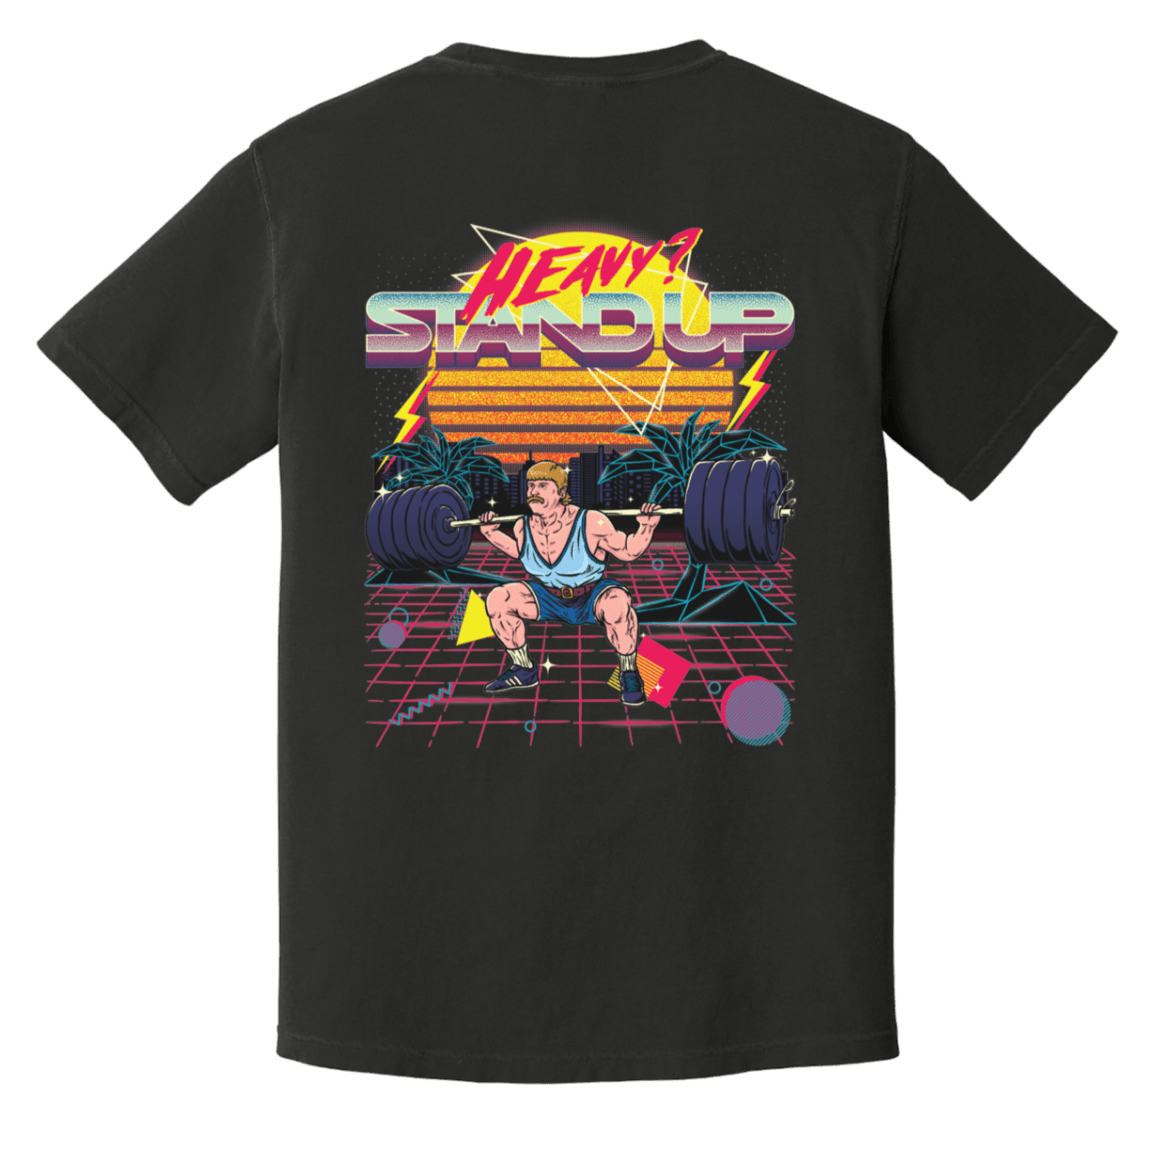 Heavy? Stand Up Streetwear Shirt - T-Shirts